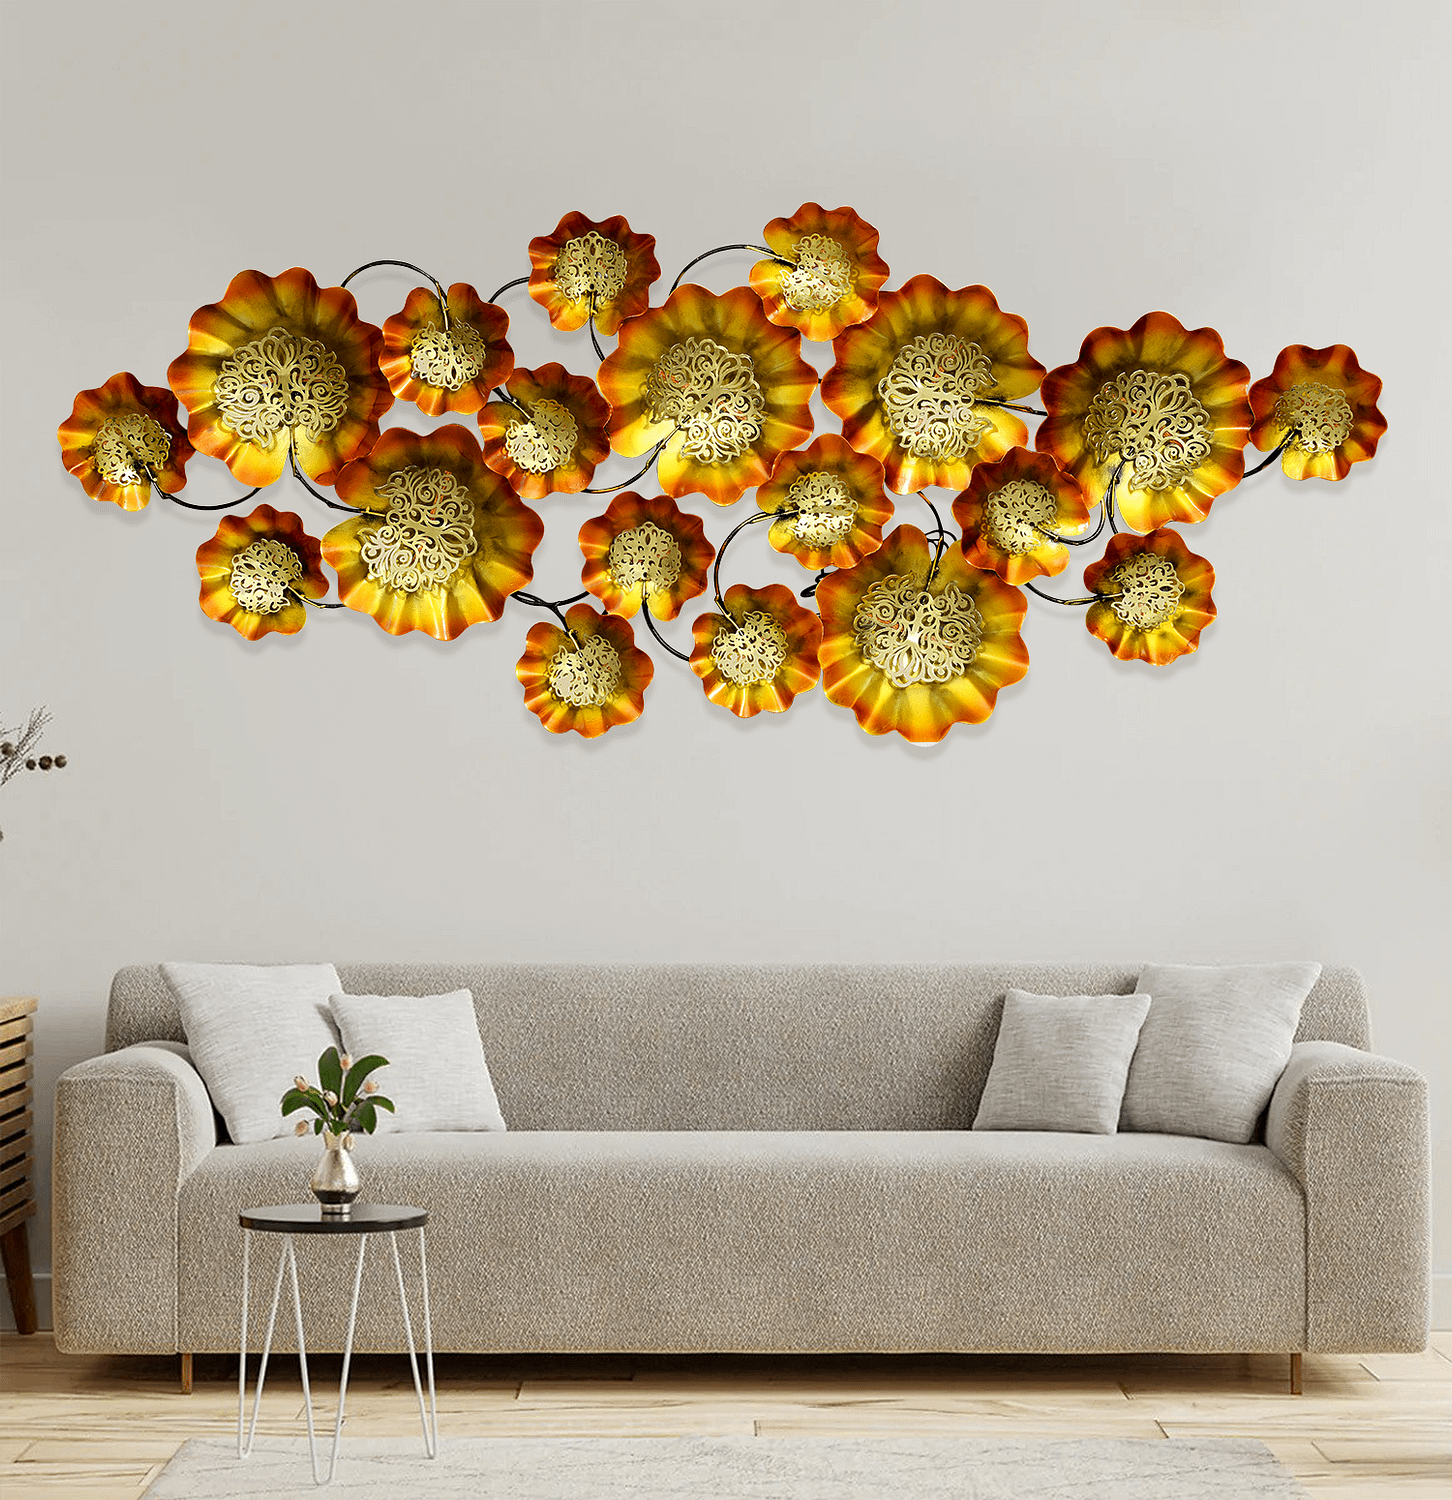 Metal Golden Acid Dome Wall Art With LED